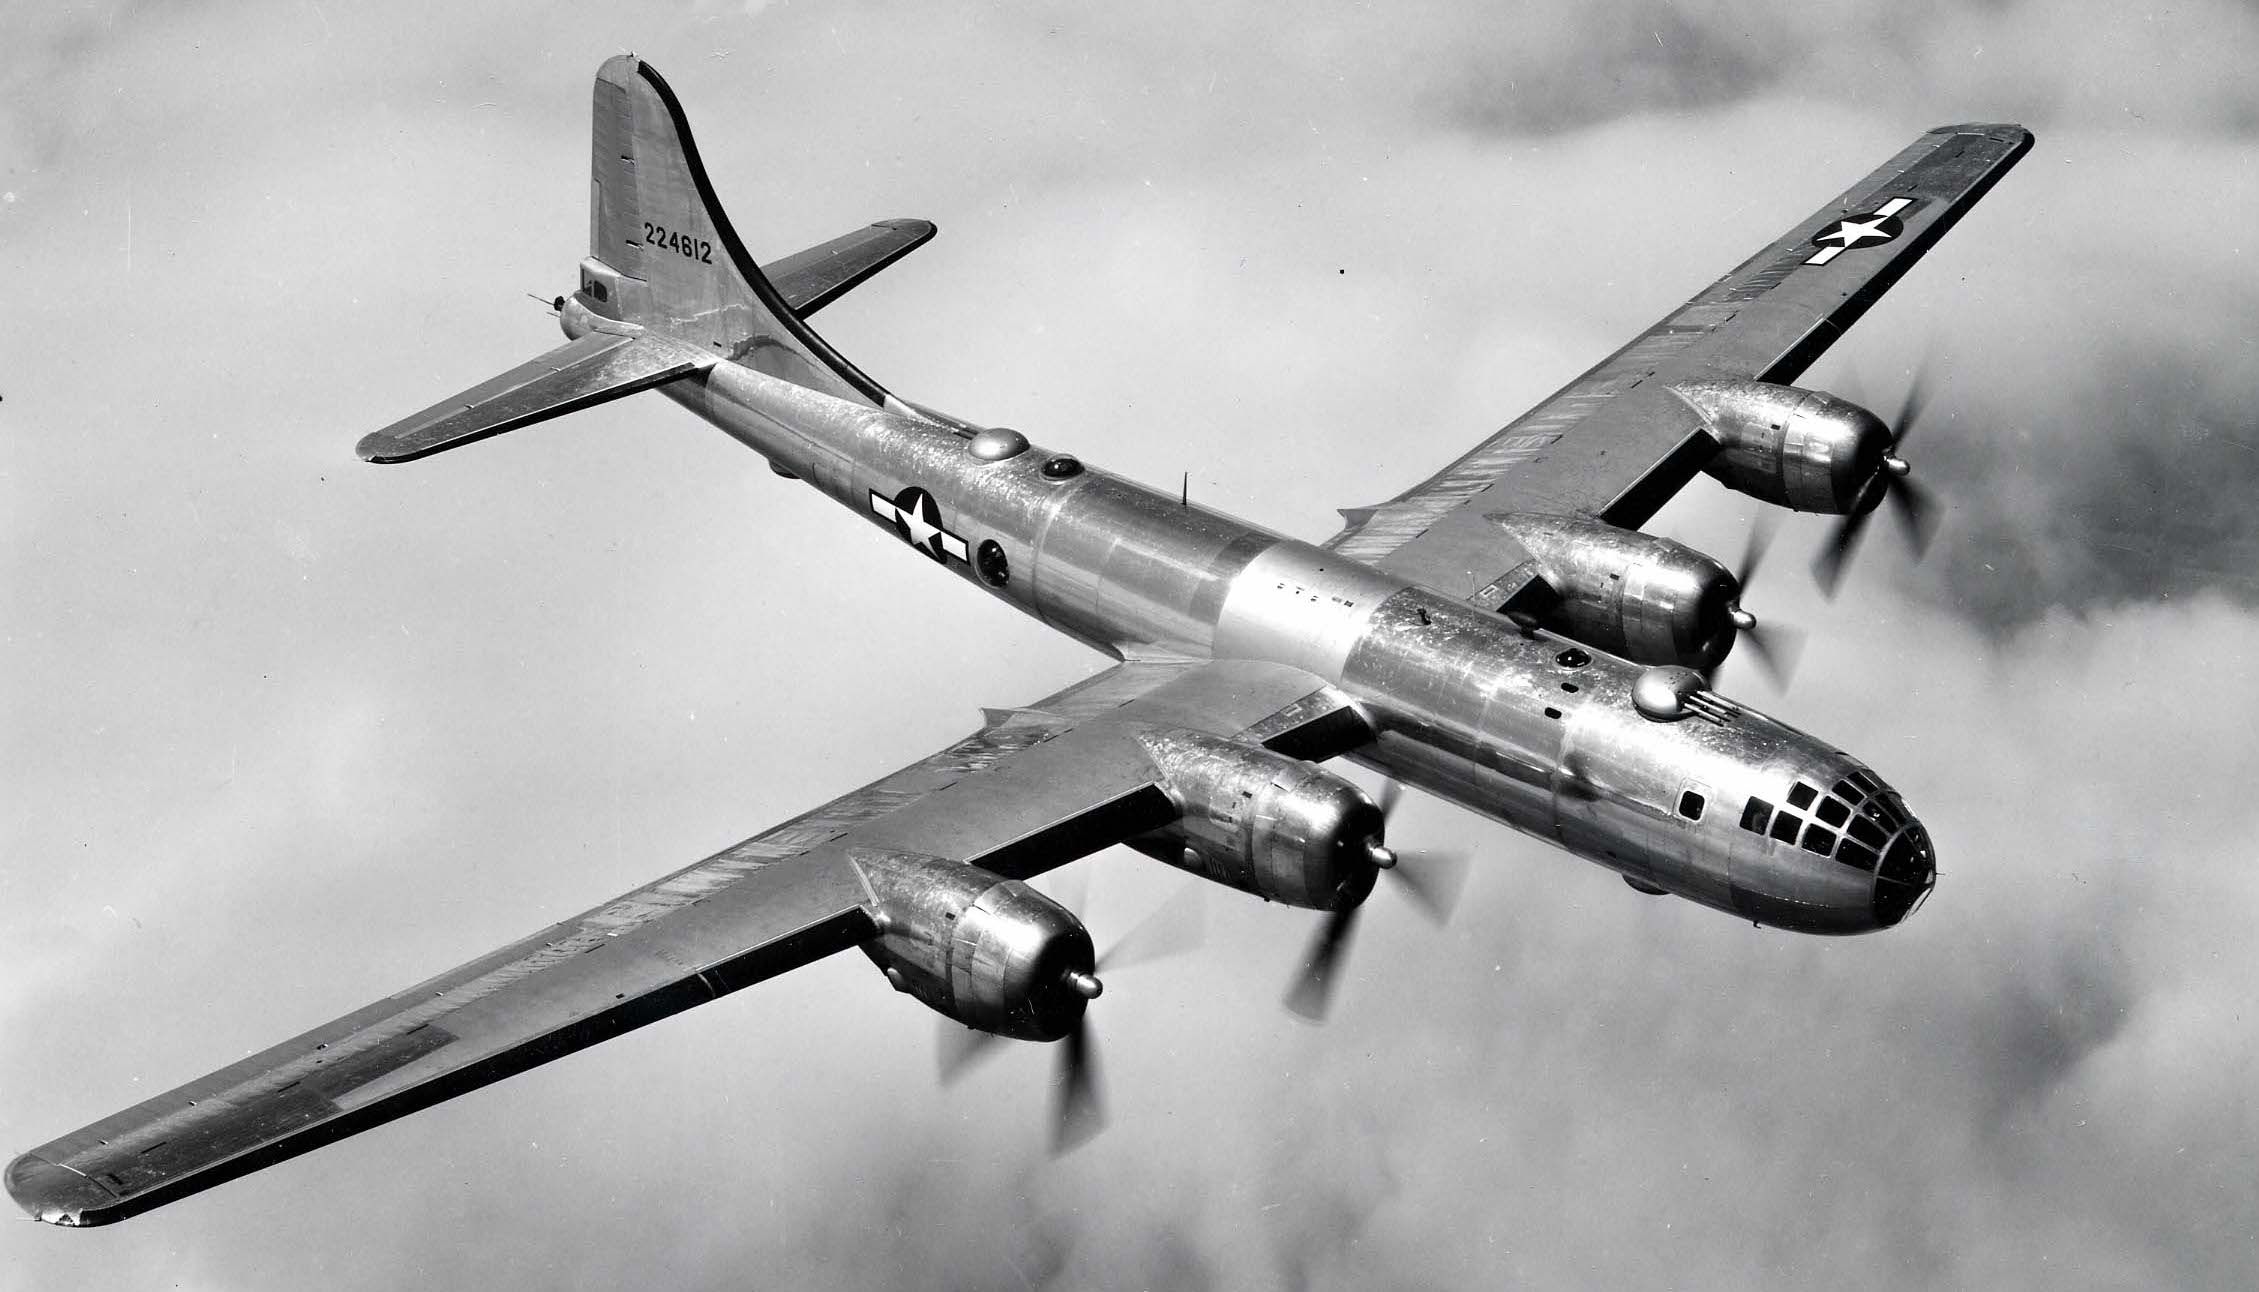 Boeing B-29 Superfortress serial 224612